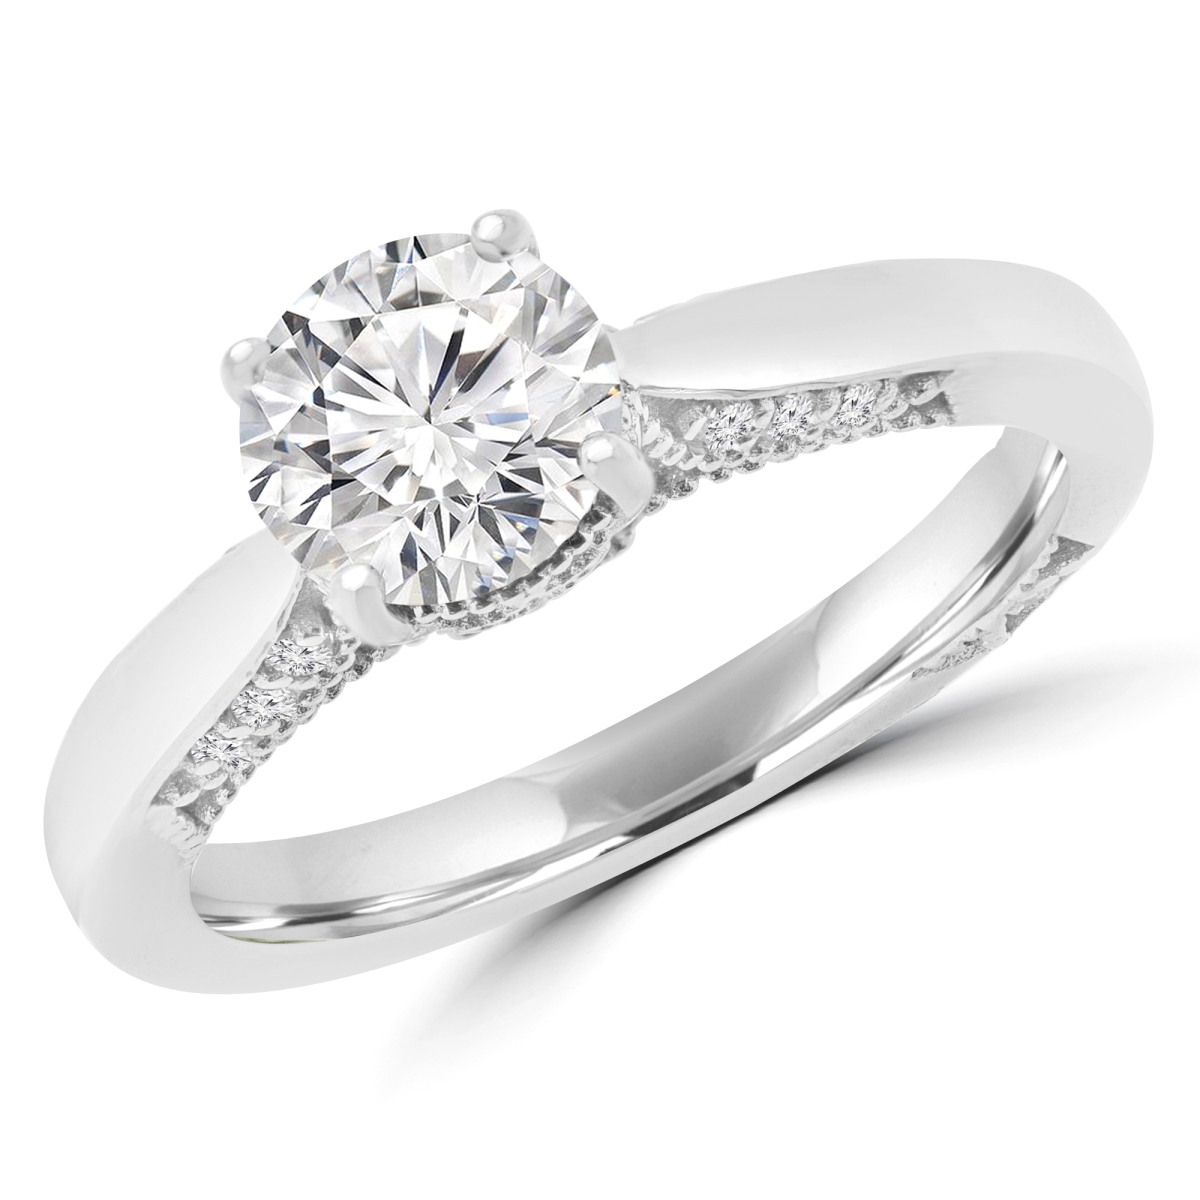 Picture of Majesty Diamonds MD170228-8.5 1.12 CTW Round Diamond Solitaire with Accents Engagement Ring in 18K White Gold - Size 8.5